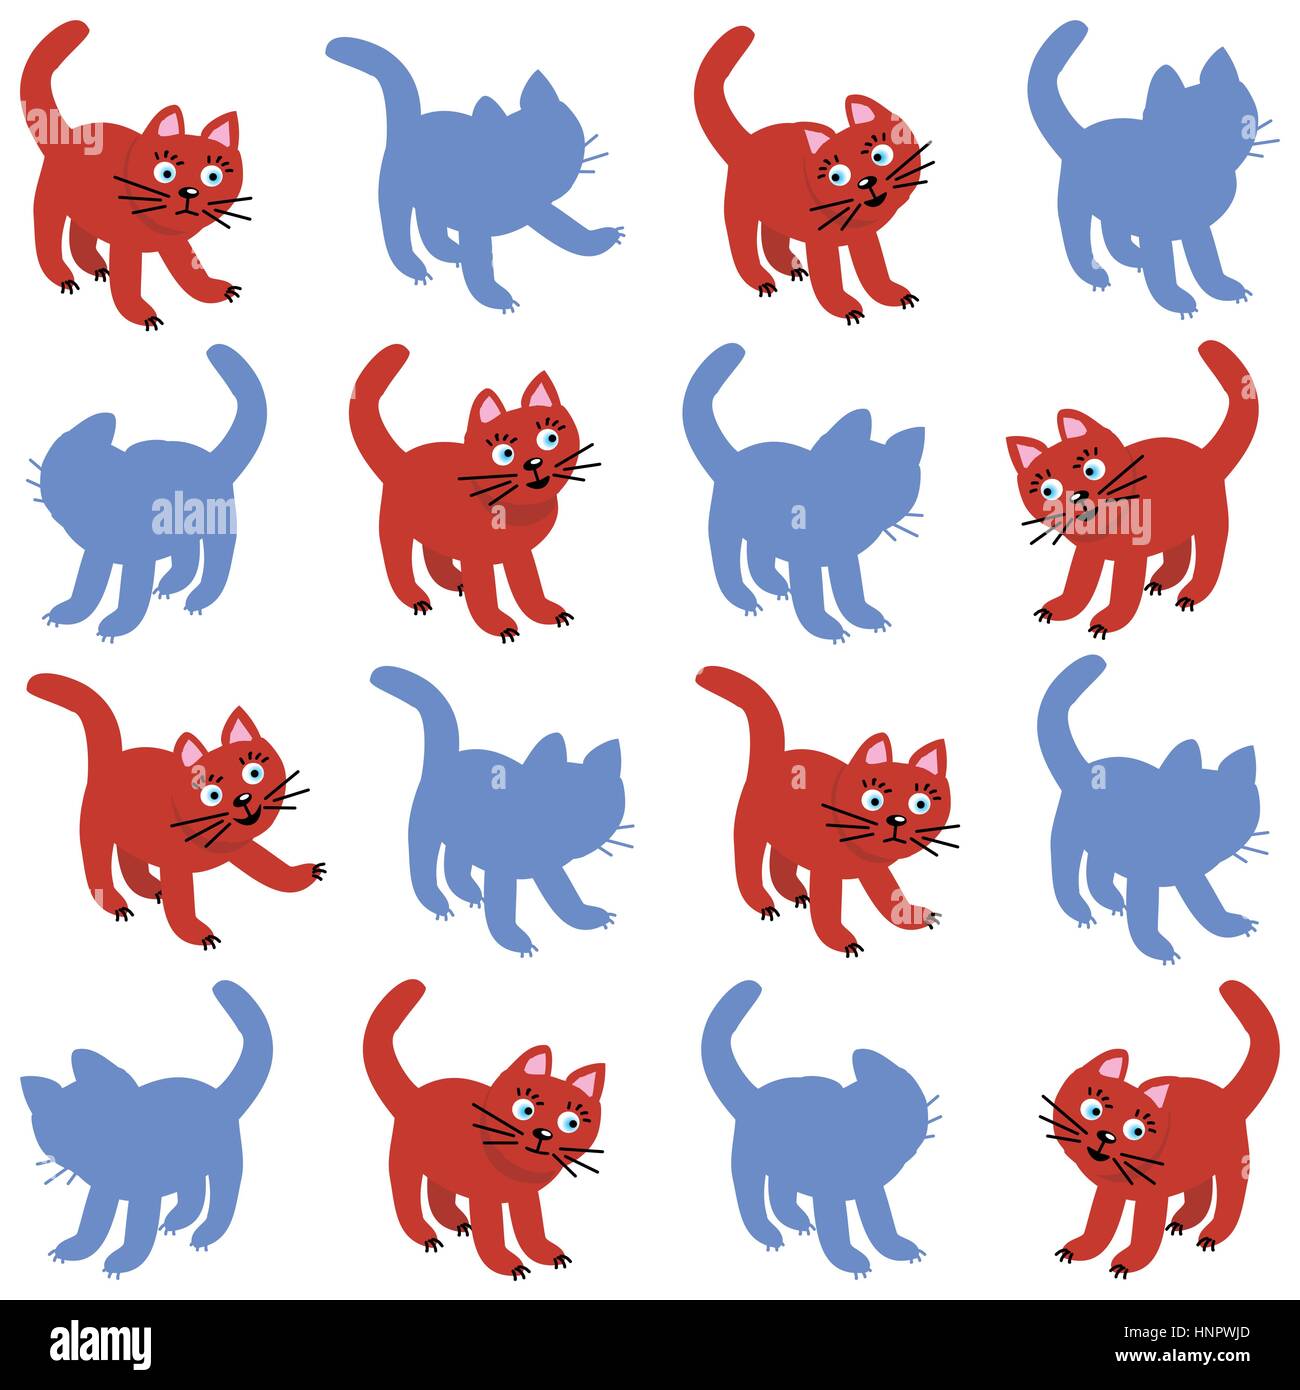 Shadow match game with red cats and their silhouettes. Or use this image as seamless pattern. Stock Vector